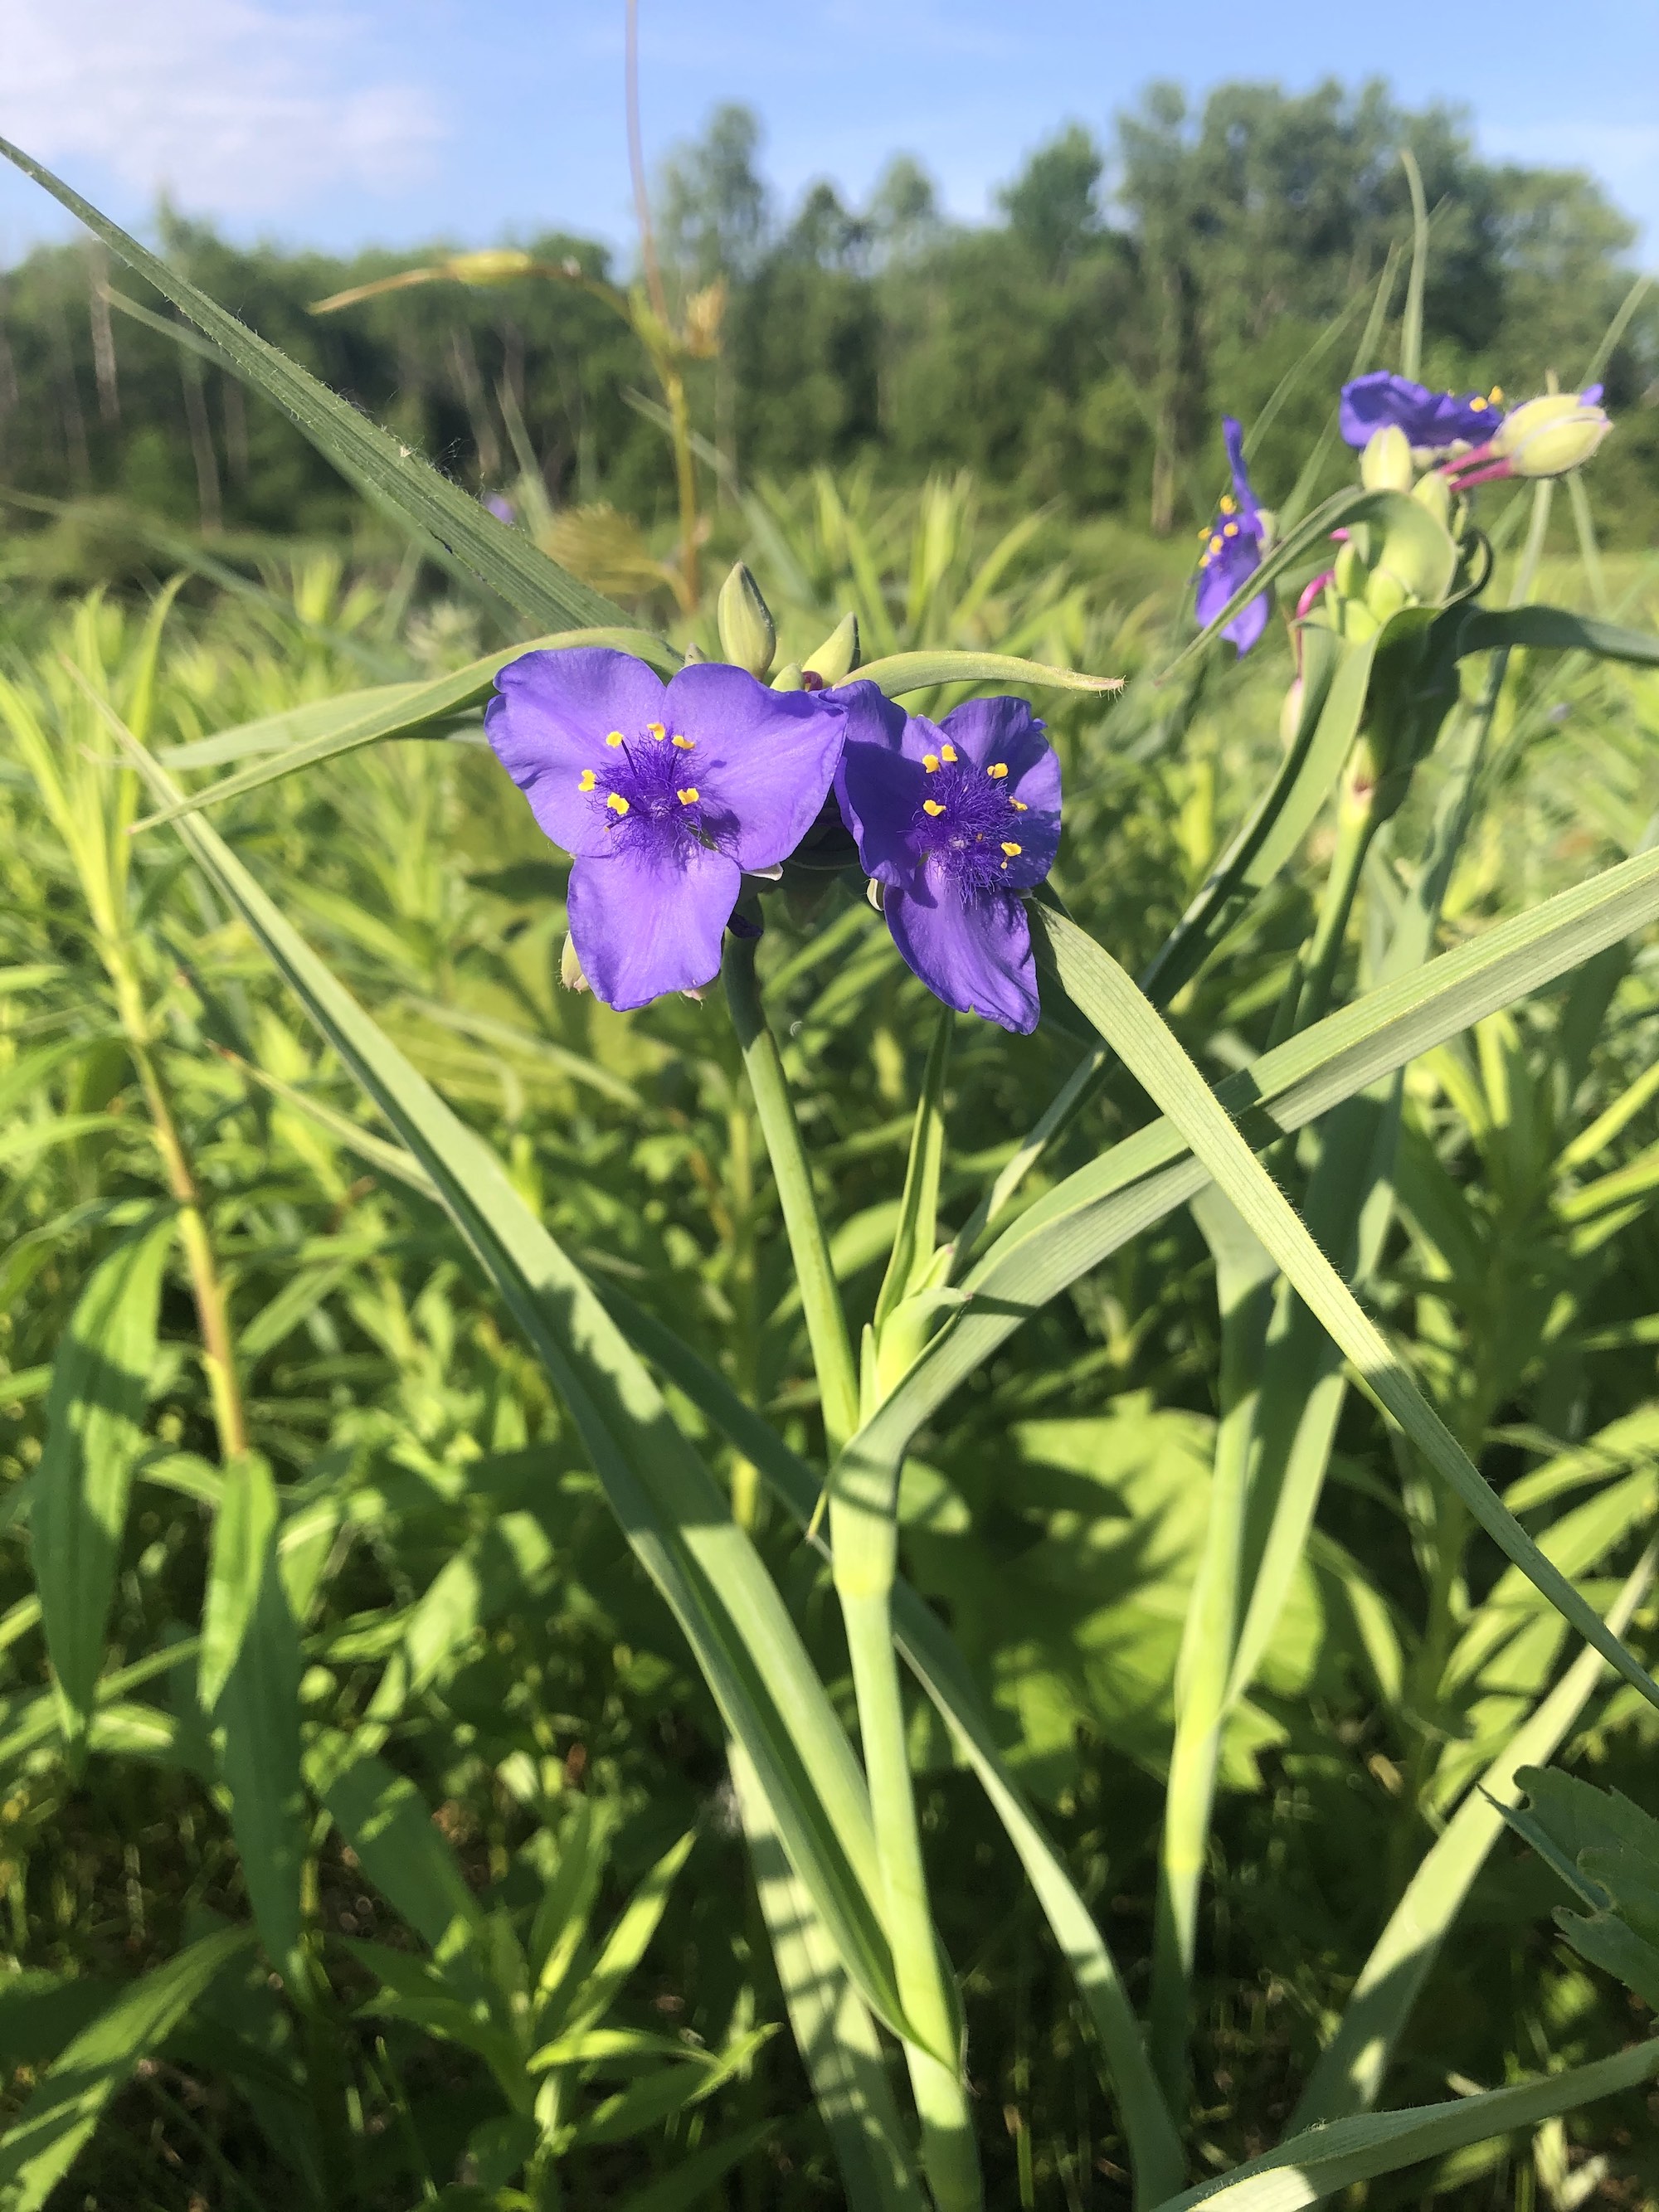 Spiderwort on bank of Marion Dunn Pond in Madison, Wisconsin on June 3, 2021.